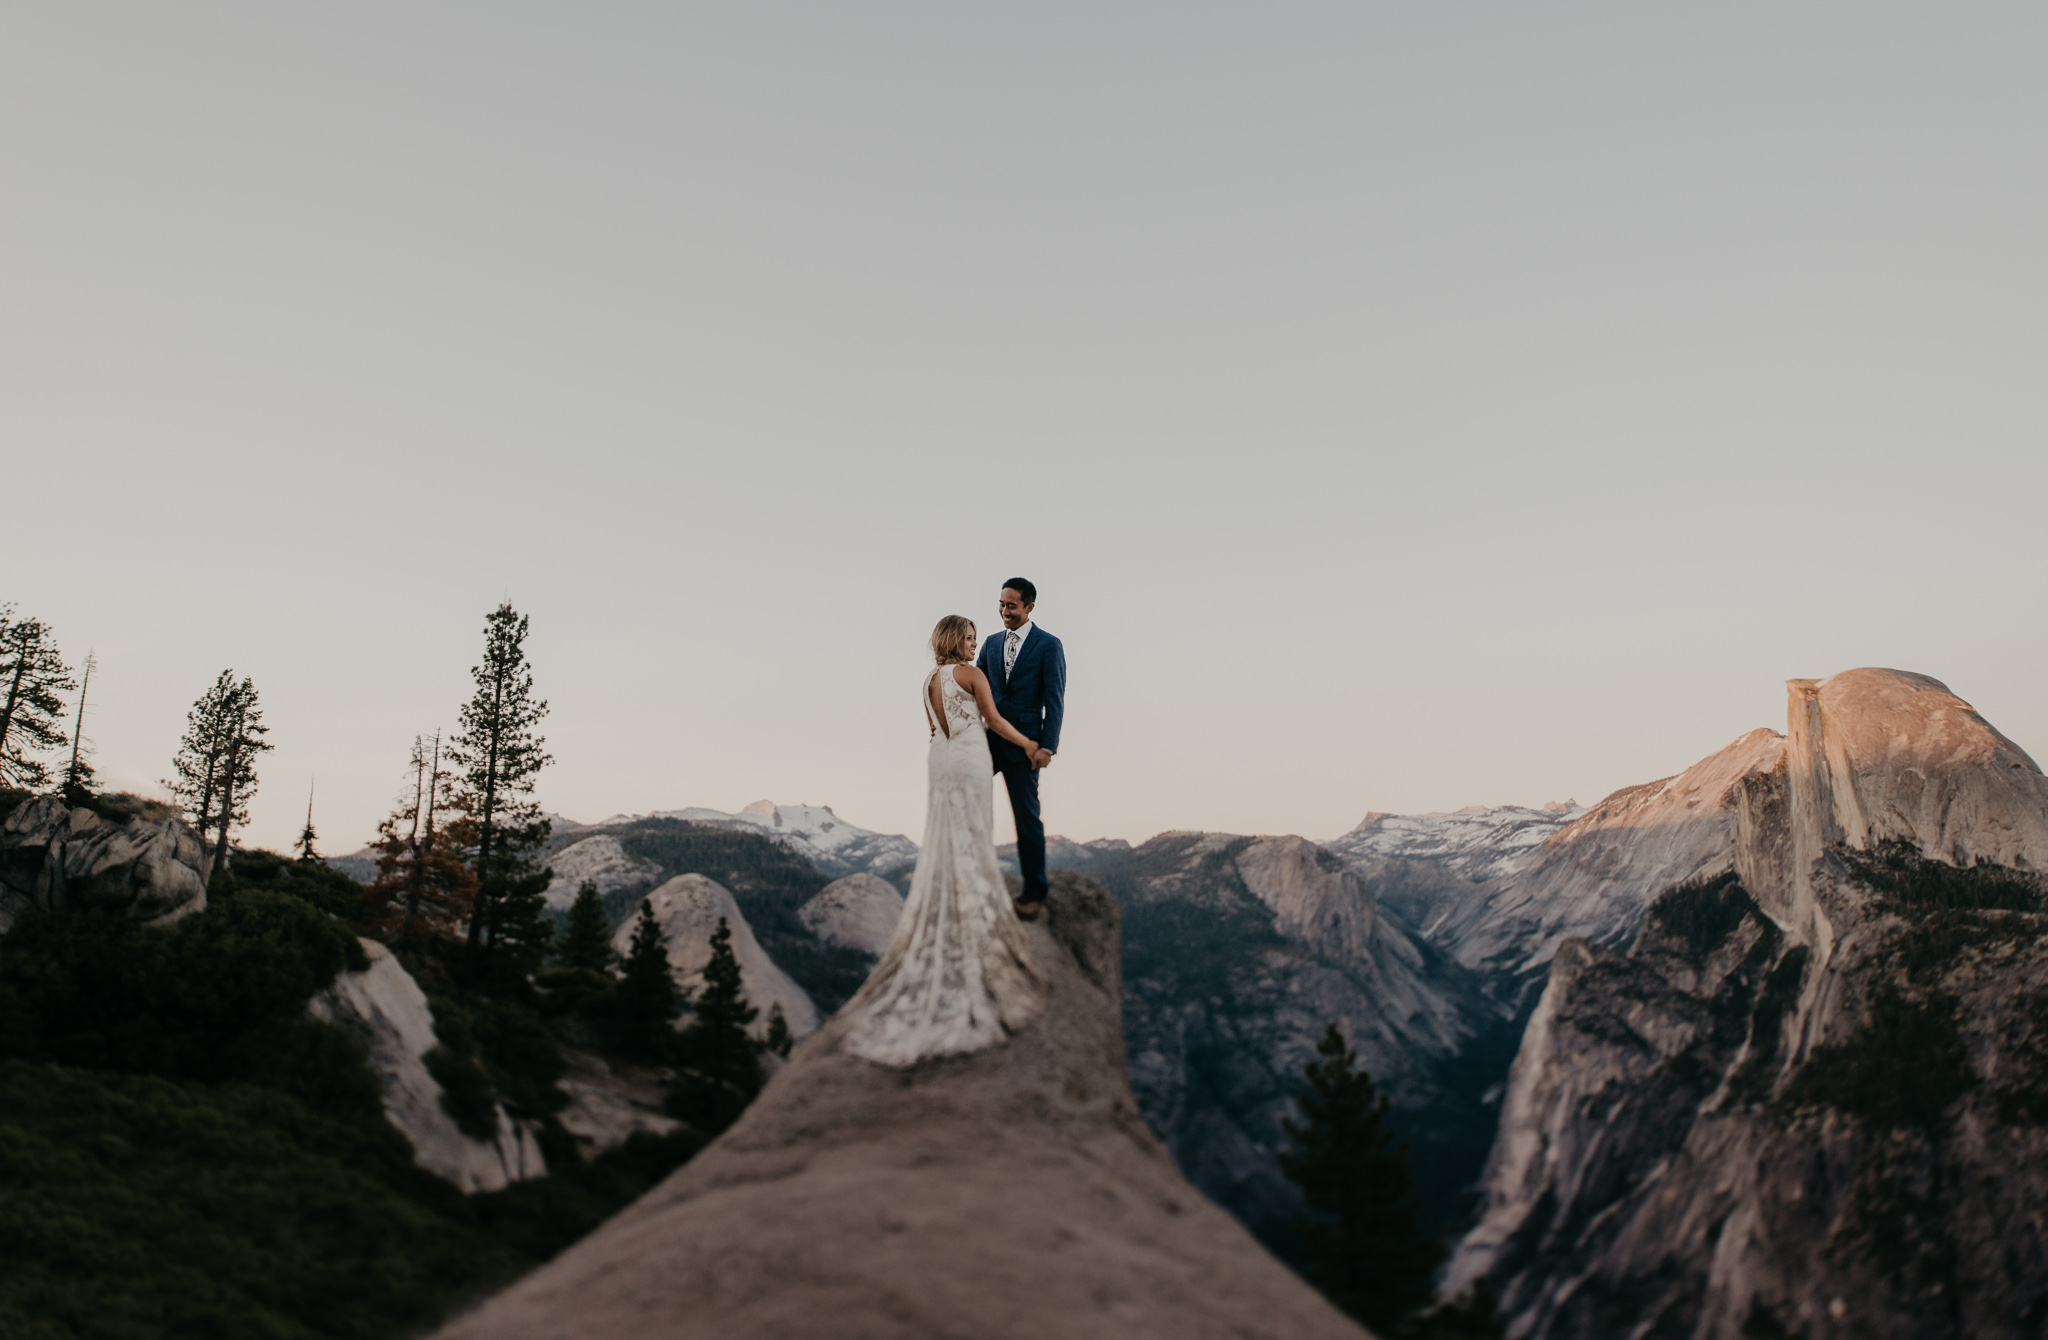 Yosemite has closures in the winter, and if you want good weather, then june through september are great times to visit. Isaiah Taylor Photography Yosemite National Park Honeymoon Session California Wedding Photographer